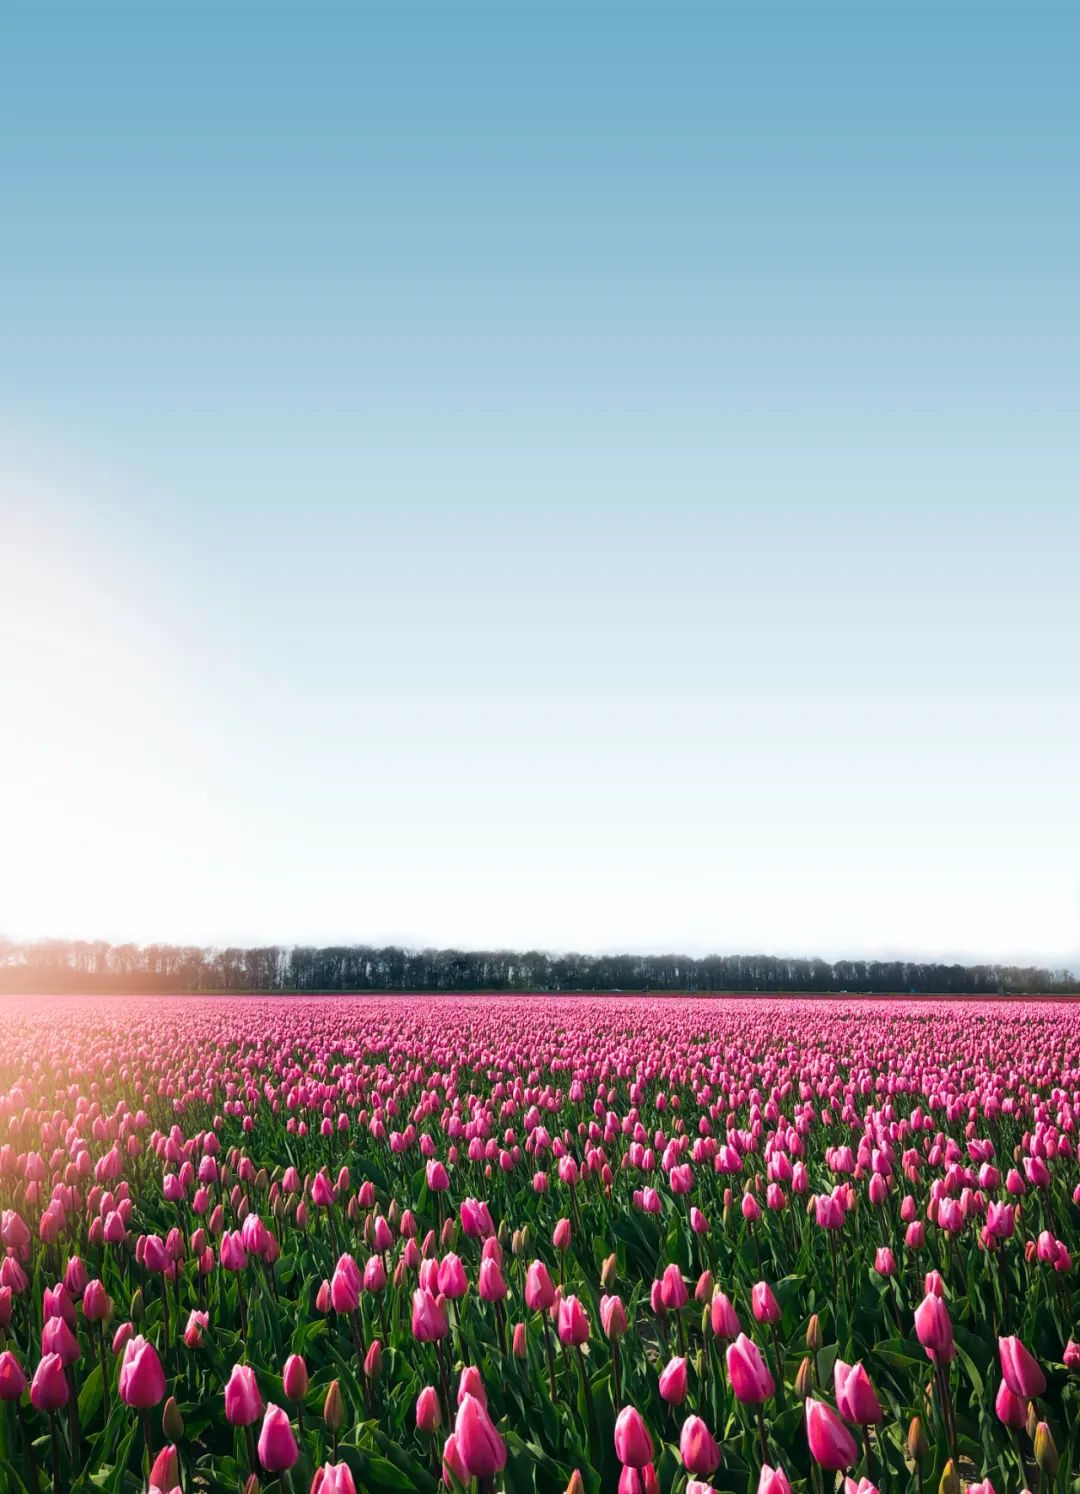 The Dutch tulip field was trampled by tourists, and the flower farmers were distressed